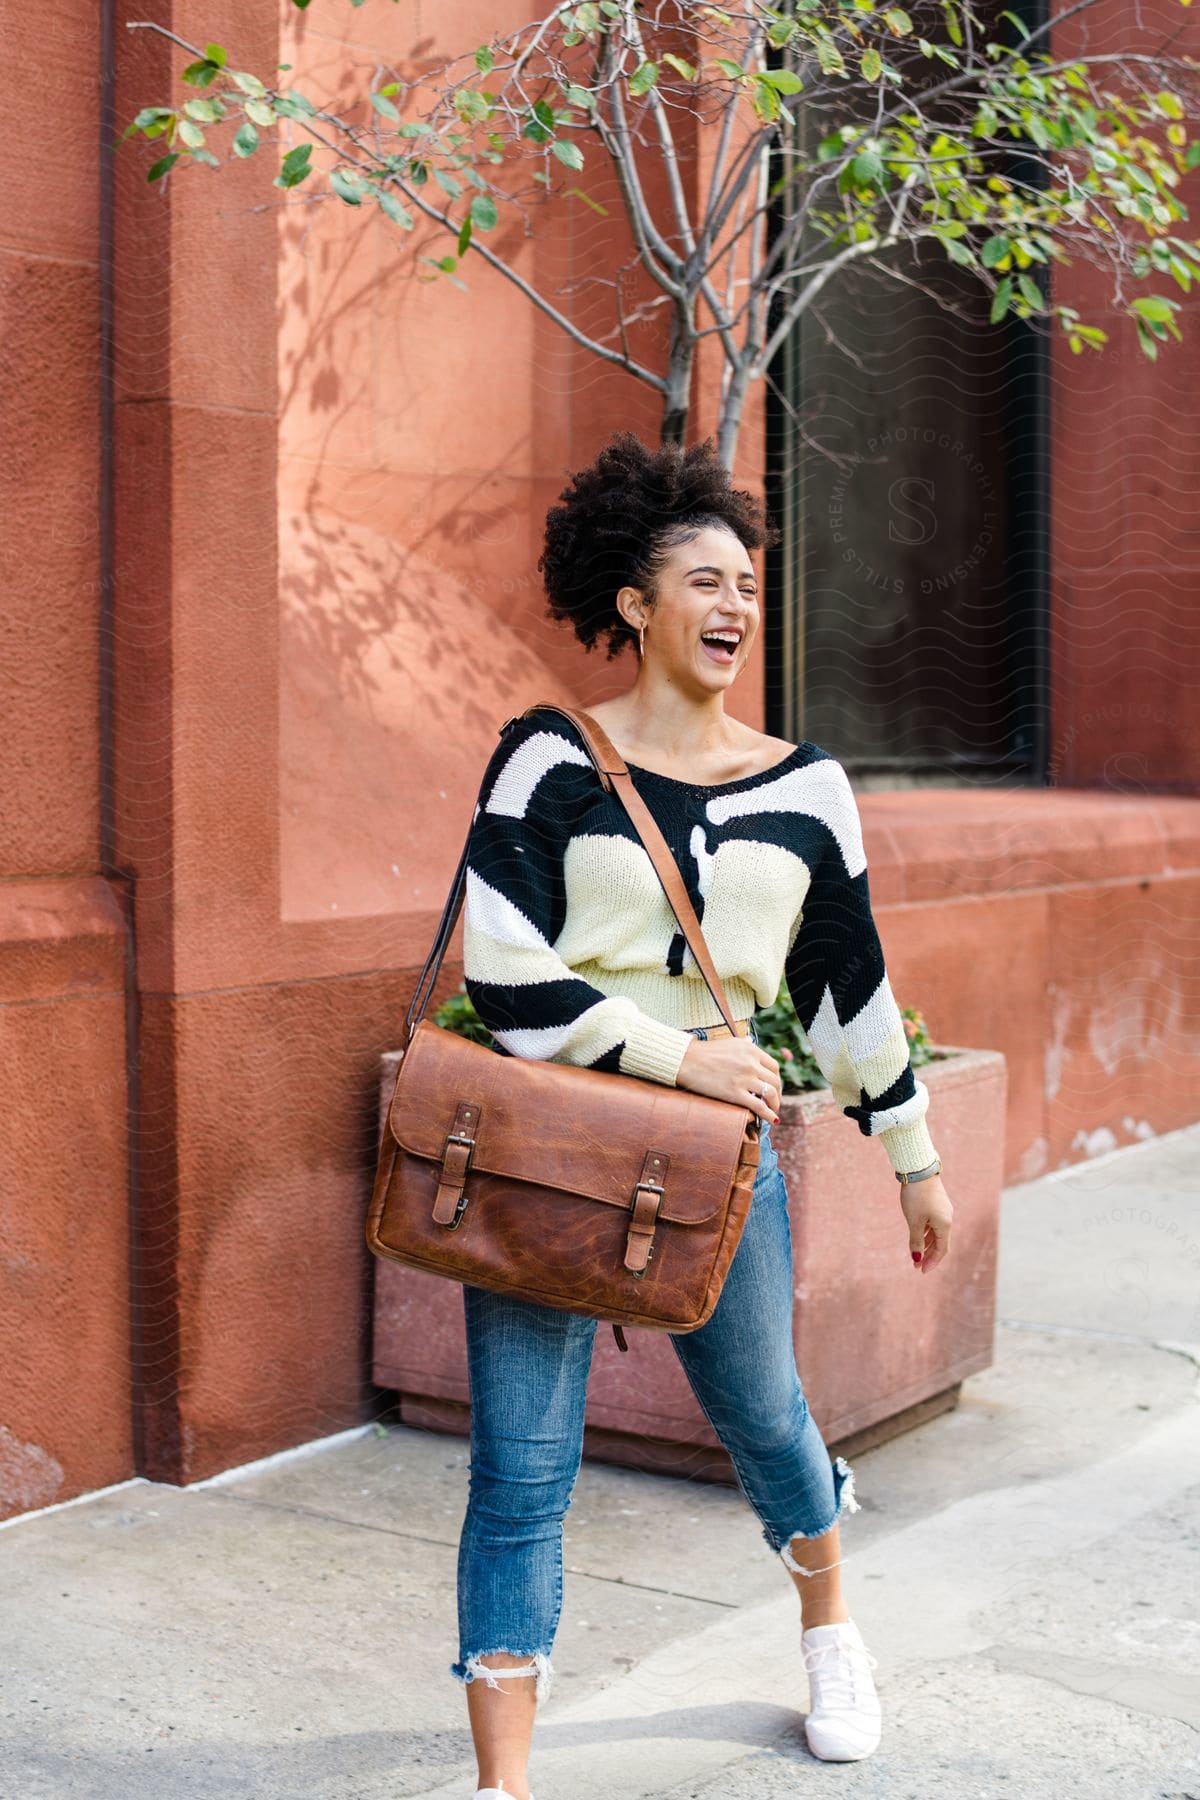 A woman modeling some clothes and a bag outdoors